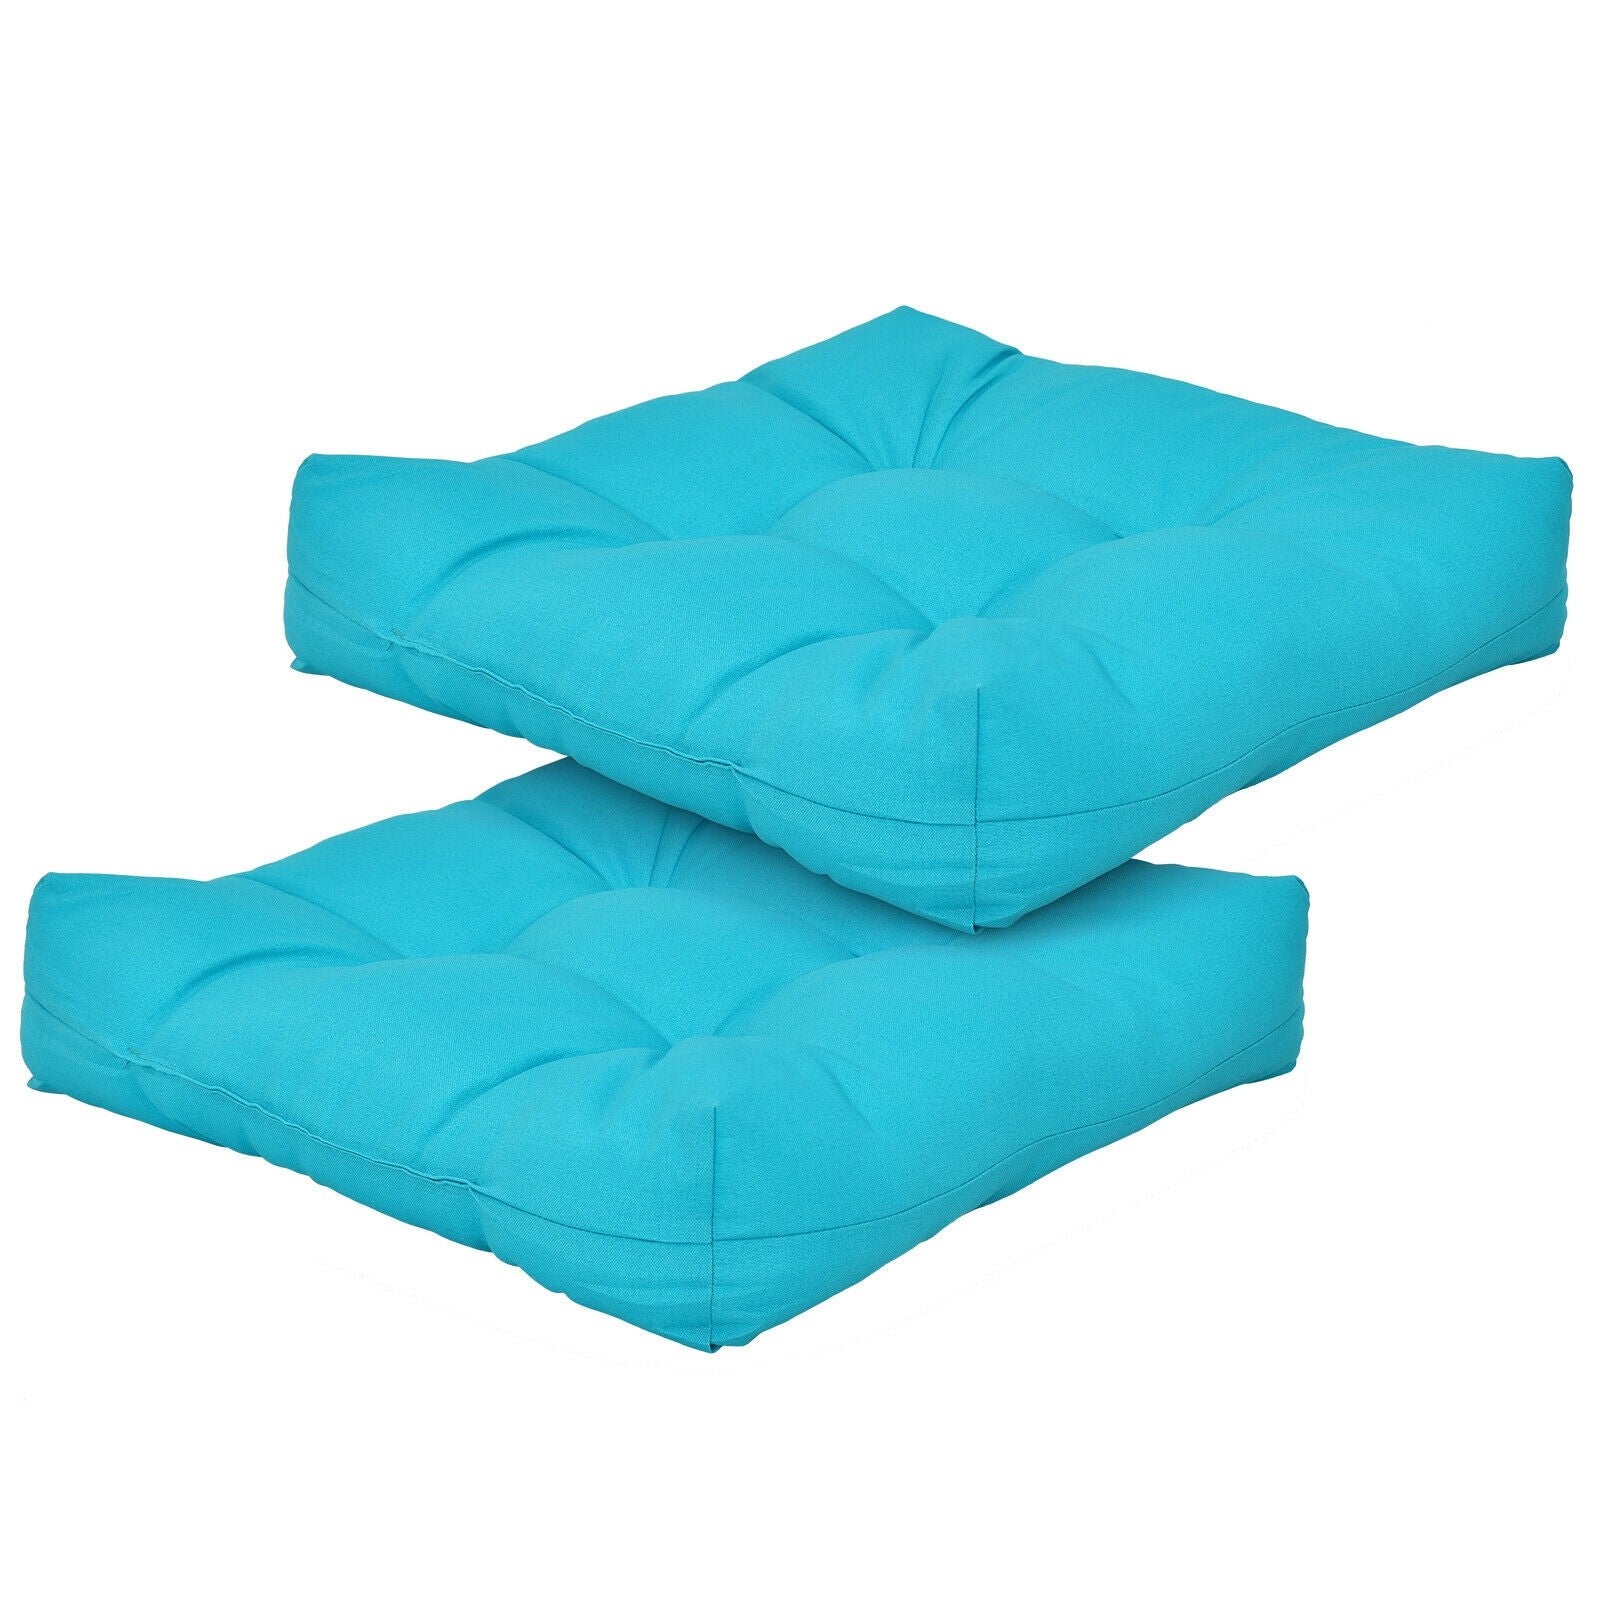 Giantex 2 Pack Tufted Patio Cushions, 4 Inch Thick Outdoor Chair Pads